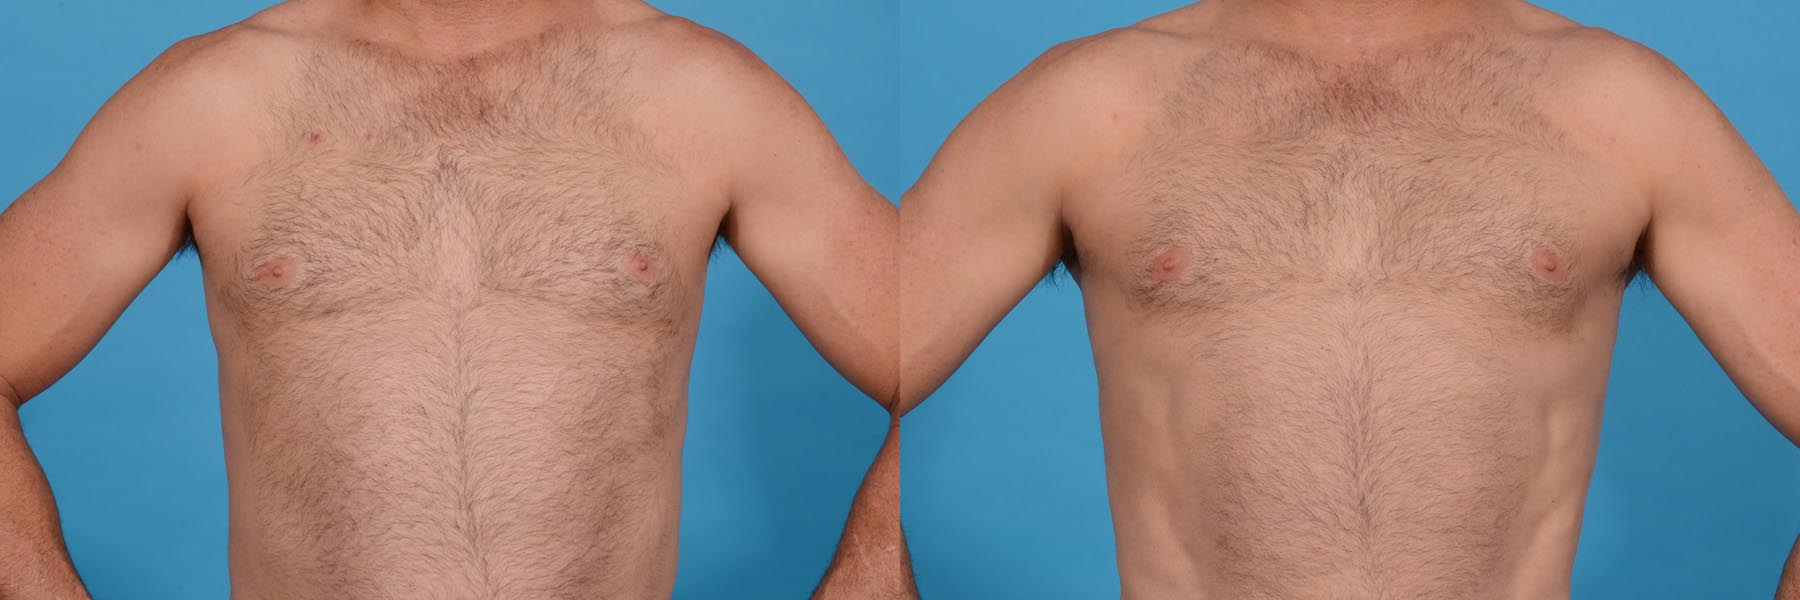 Chest Contouring with Abdominal Etching Before and After Photo by Sculpt Aesthetic Center in Frisco, TX